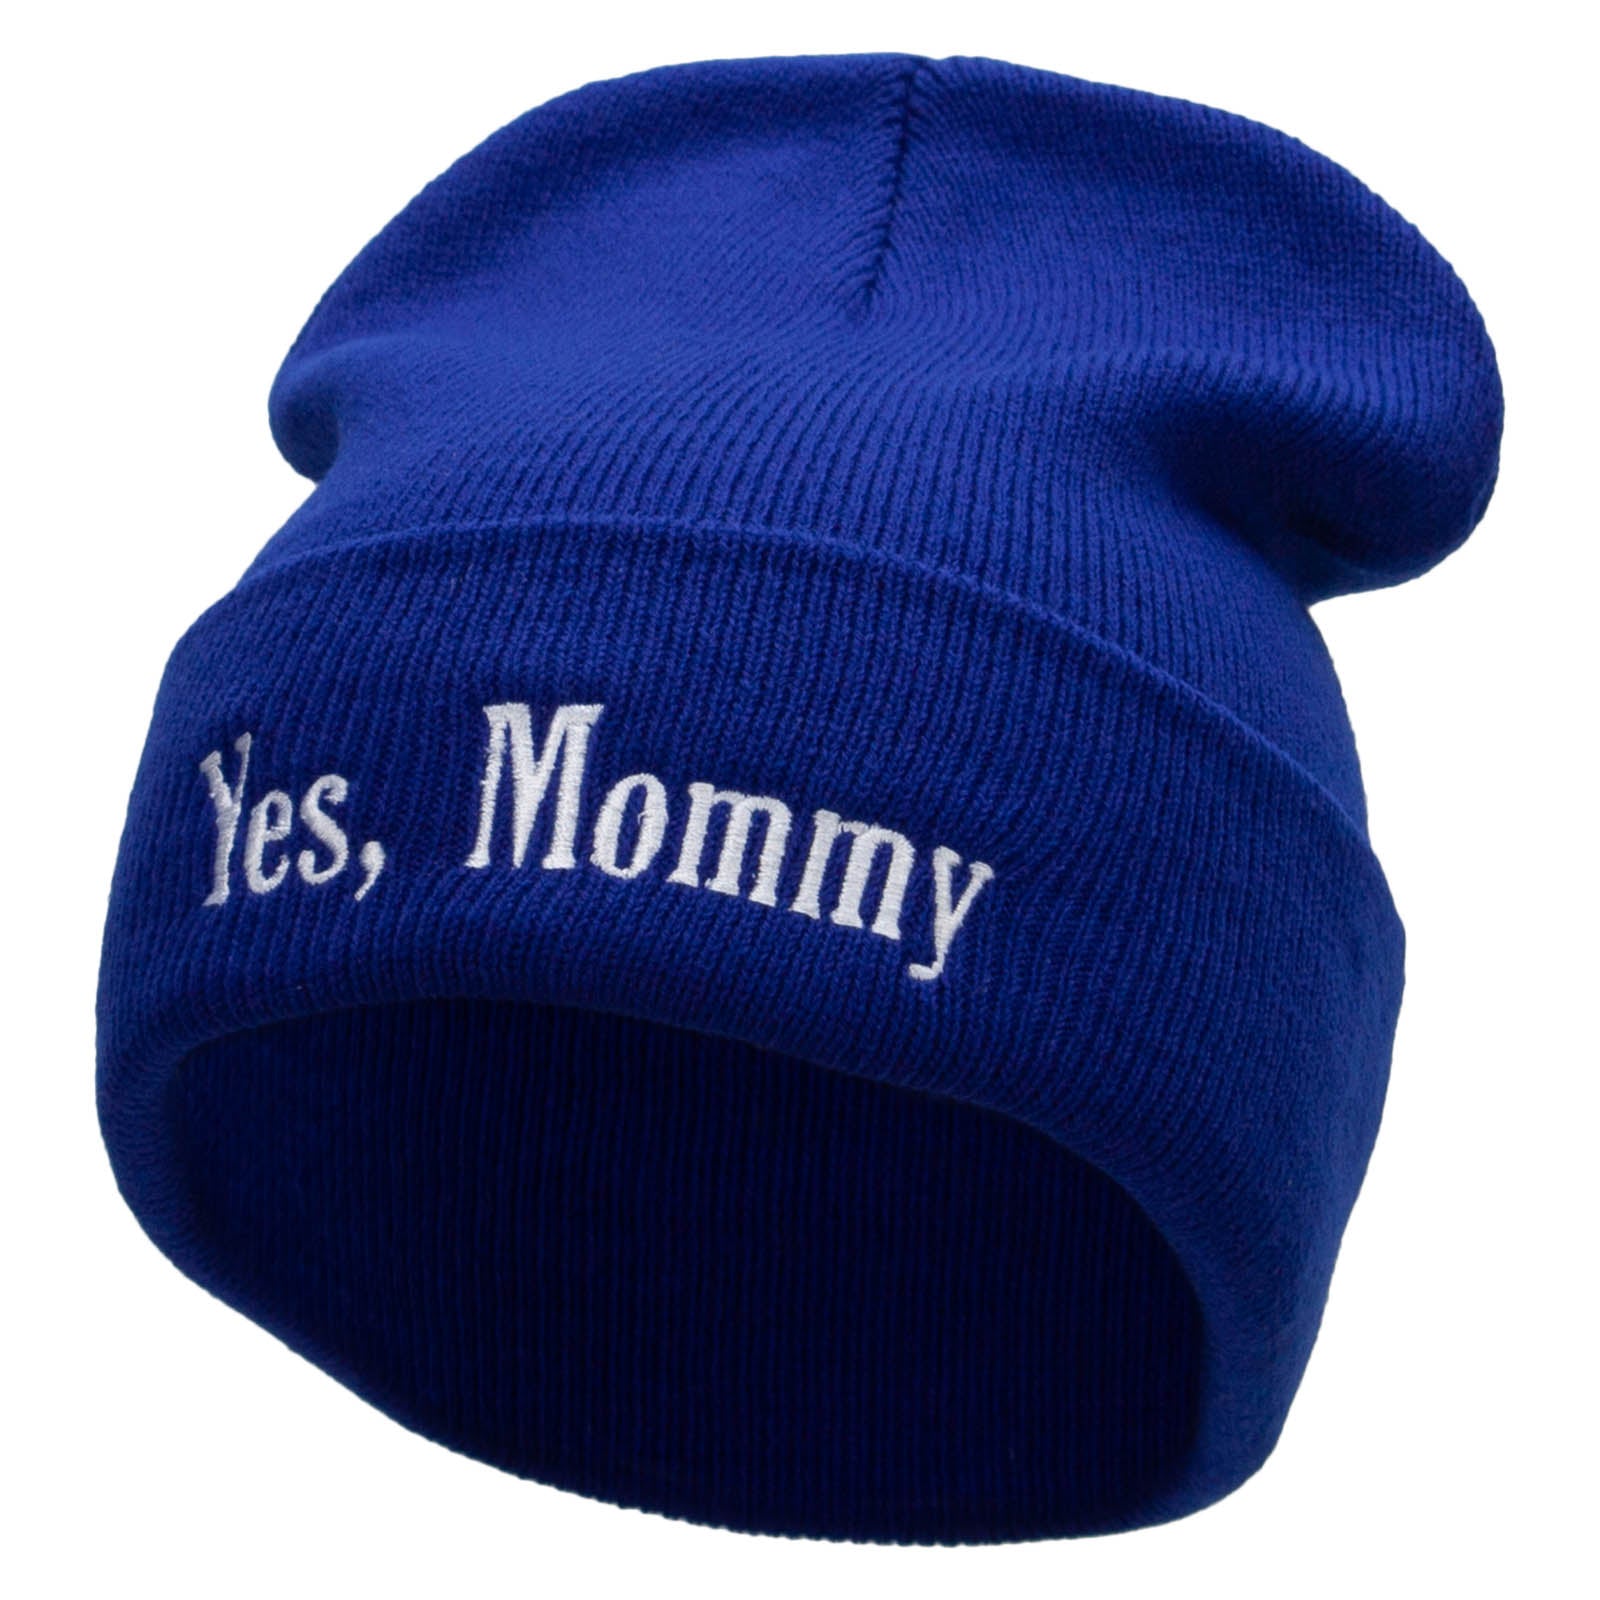 Yes, Mommy Embroidered 12 Inch Long Knitted Beanie - Royal OSFM